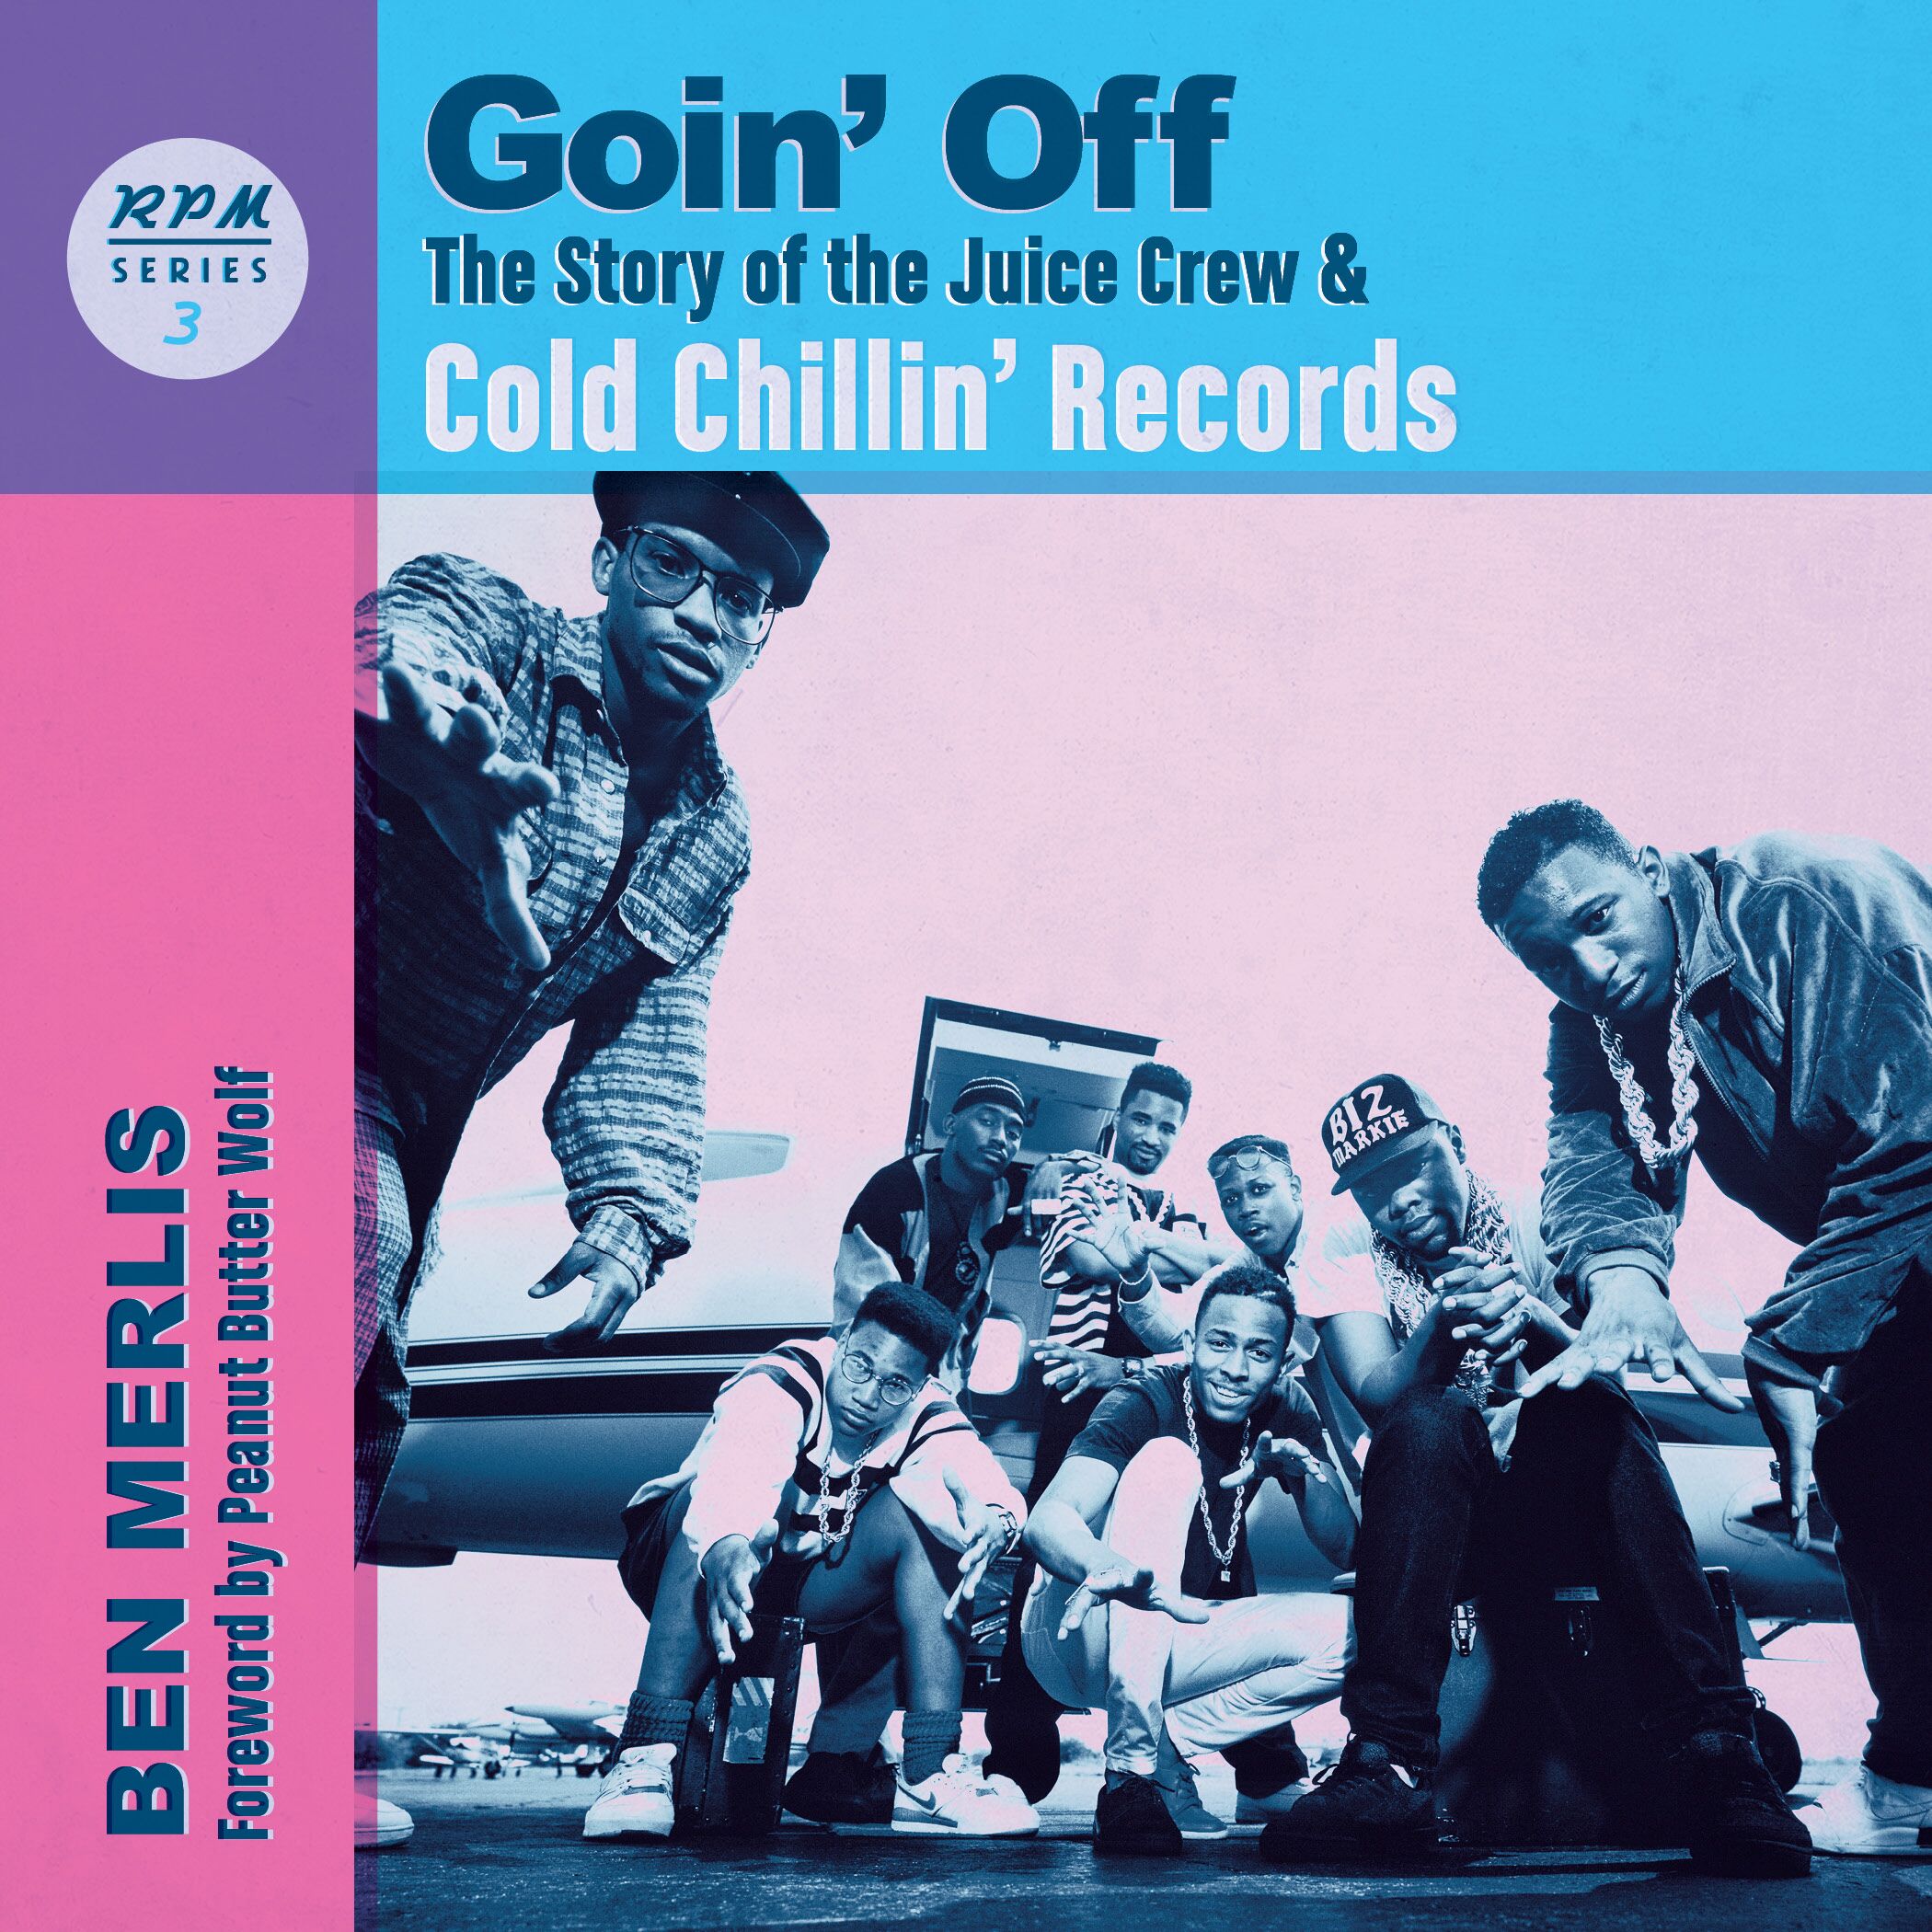 Book Launch: Goin' Off - The Story of the Juice Crew & Cold Chillin' Records by Ben Merlis in conversation with Masta Ace